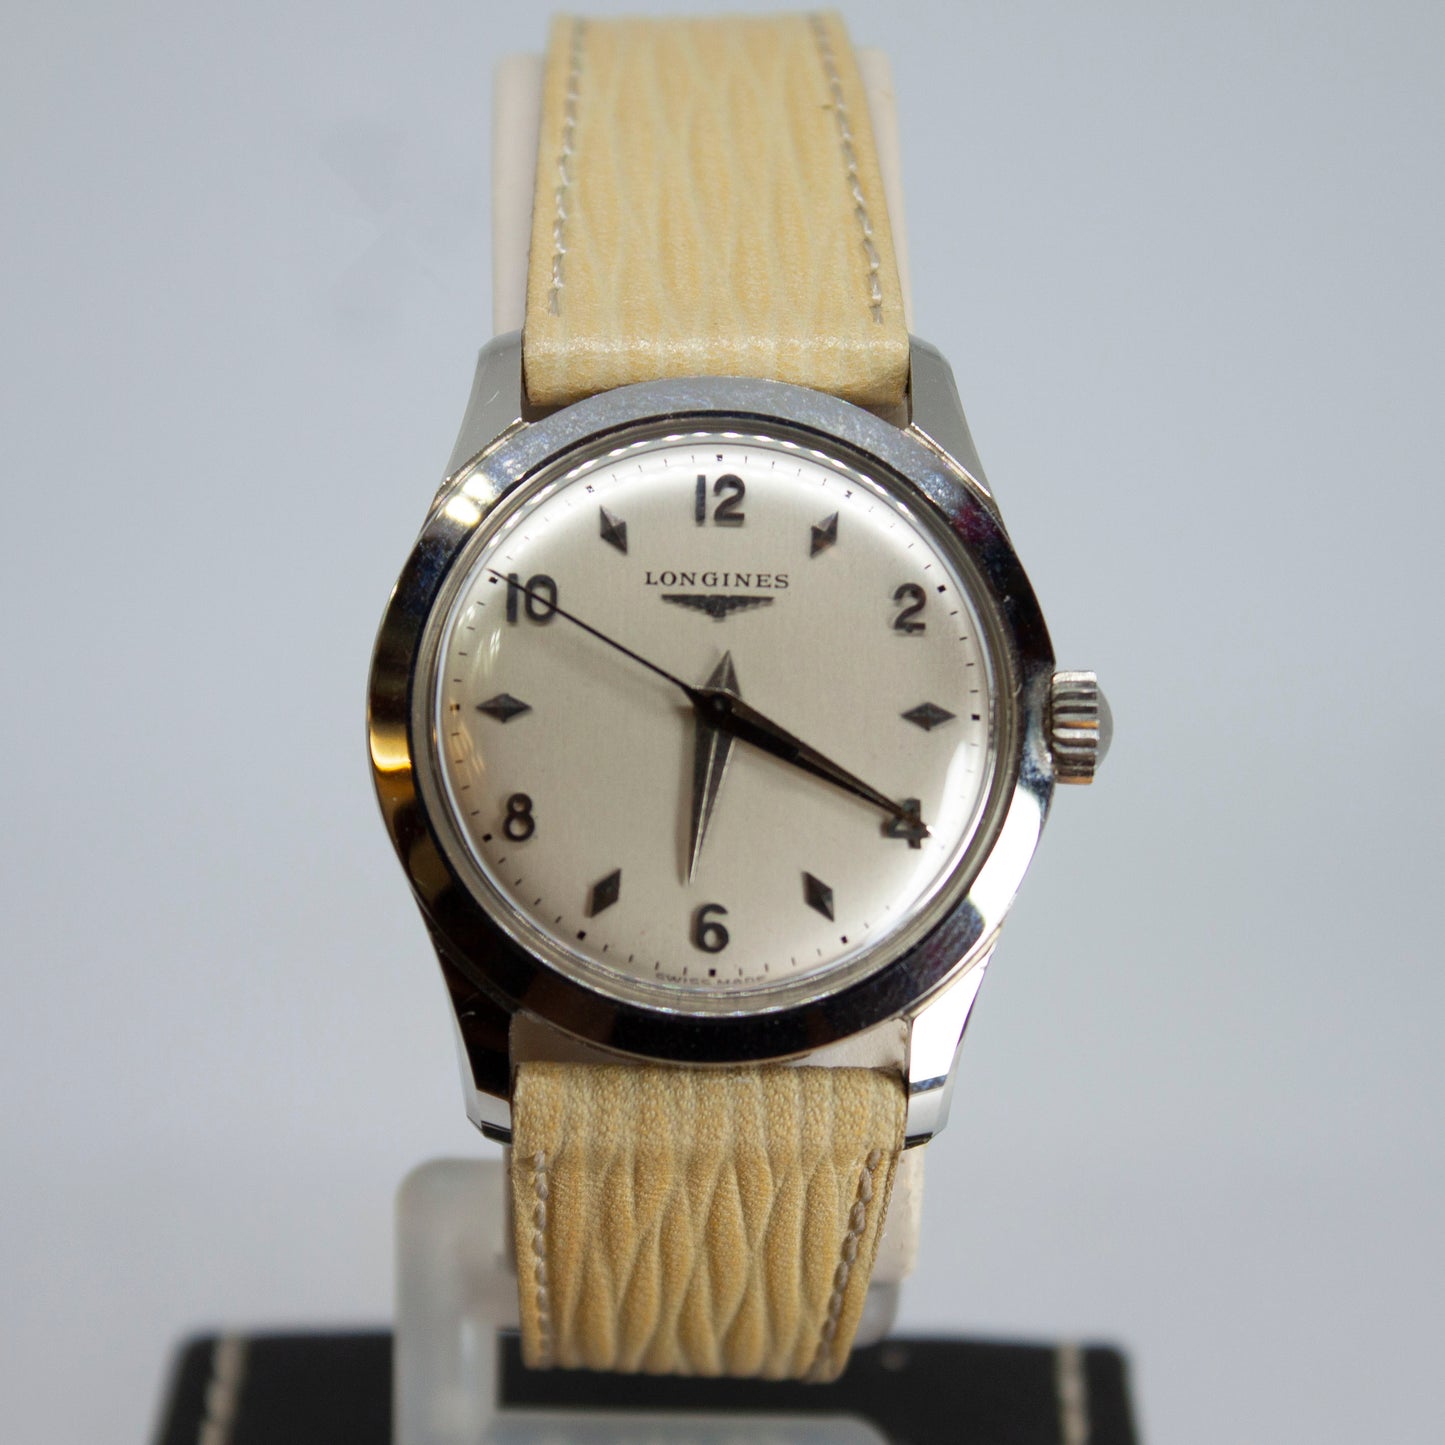 New Old Stock (N.O.S.) Longines Watch 1960s 6262 LG0005